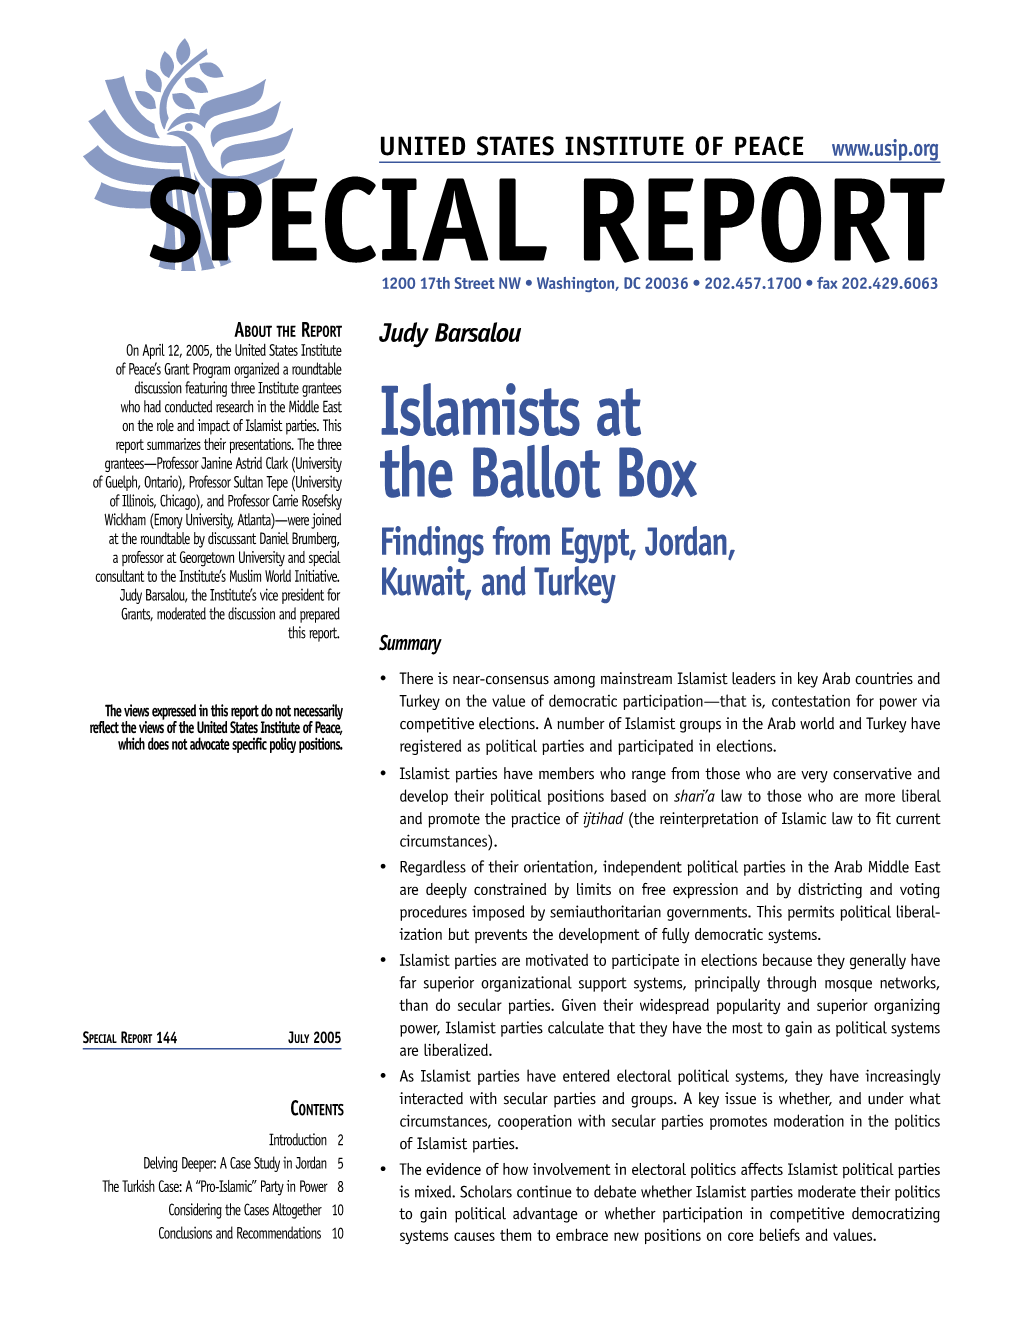 Islamists at the Ballot Box: Findings from Egypt, Jordan, Kuwait, And